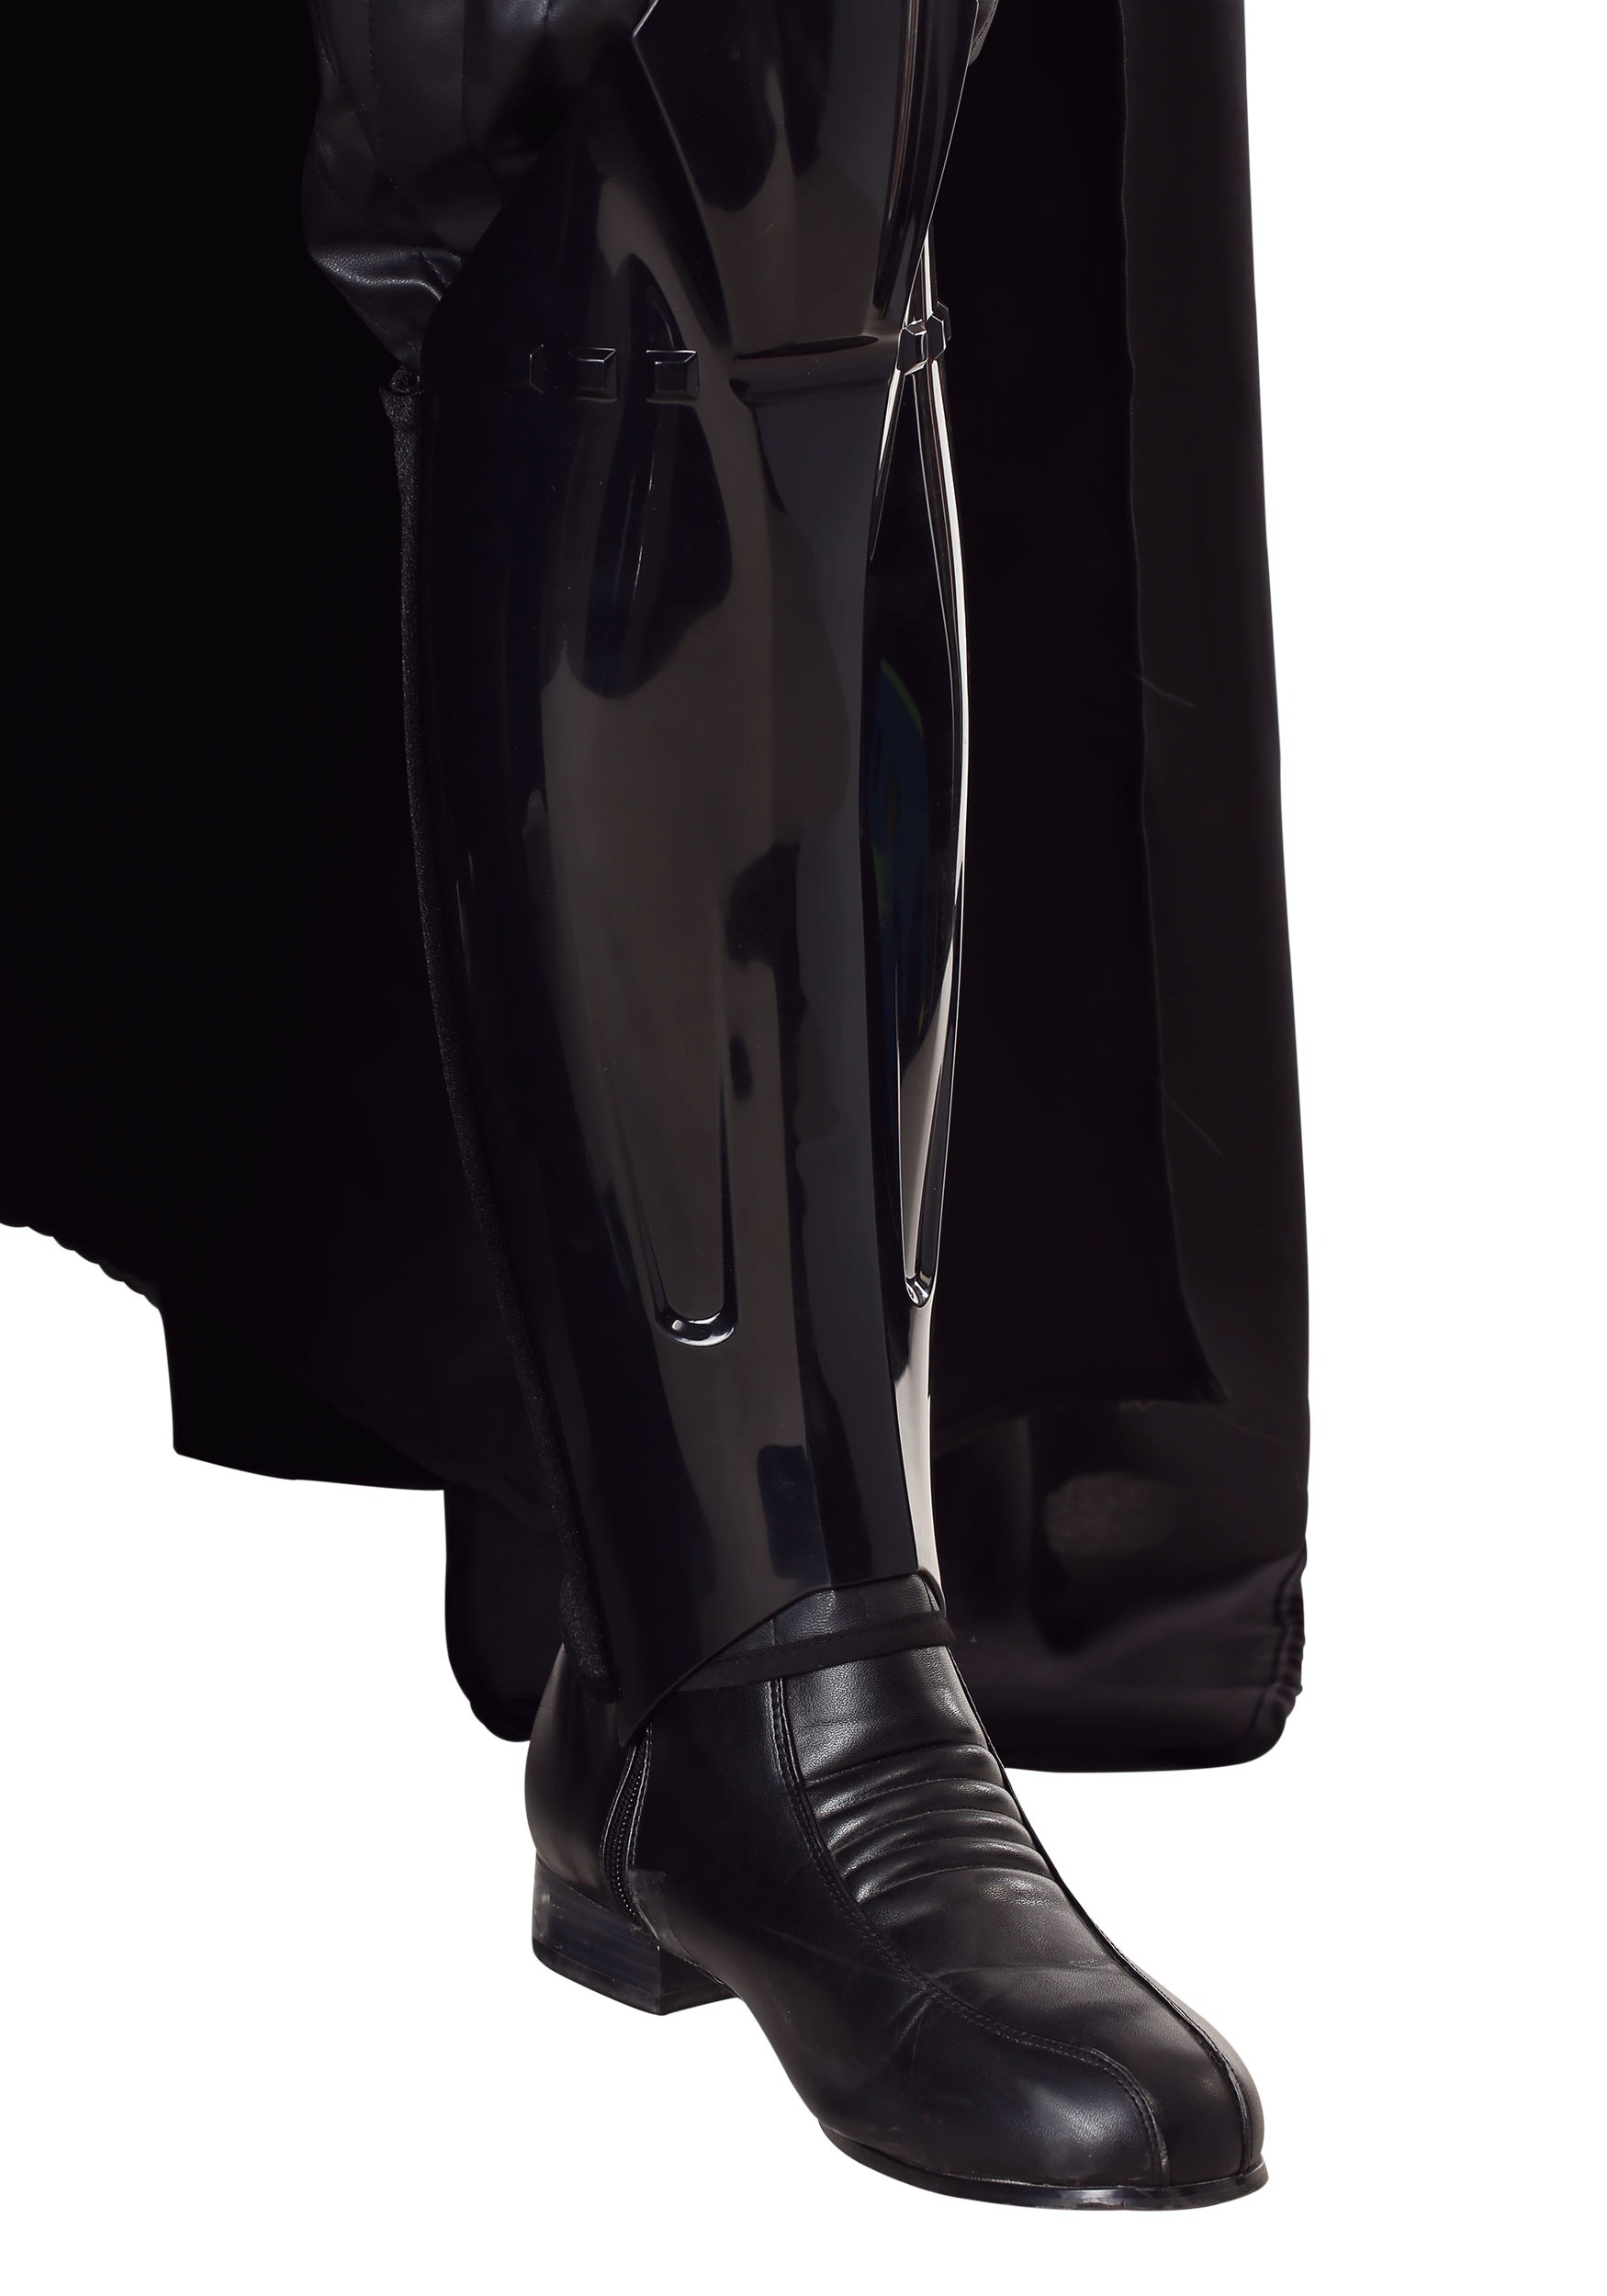 Star Wars Jedi Boots Black for your Han Solo Maul Vader X-Wing Costumes from UK 